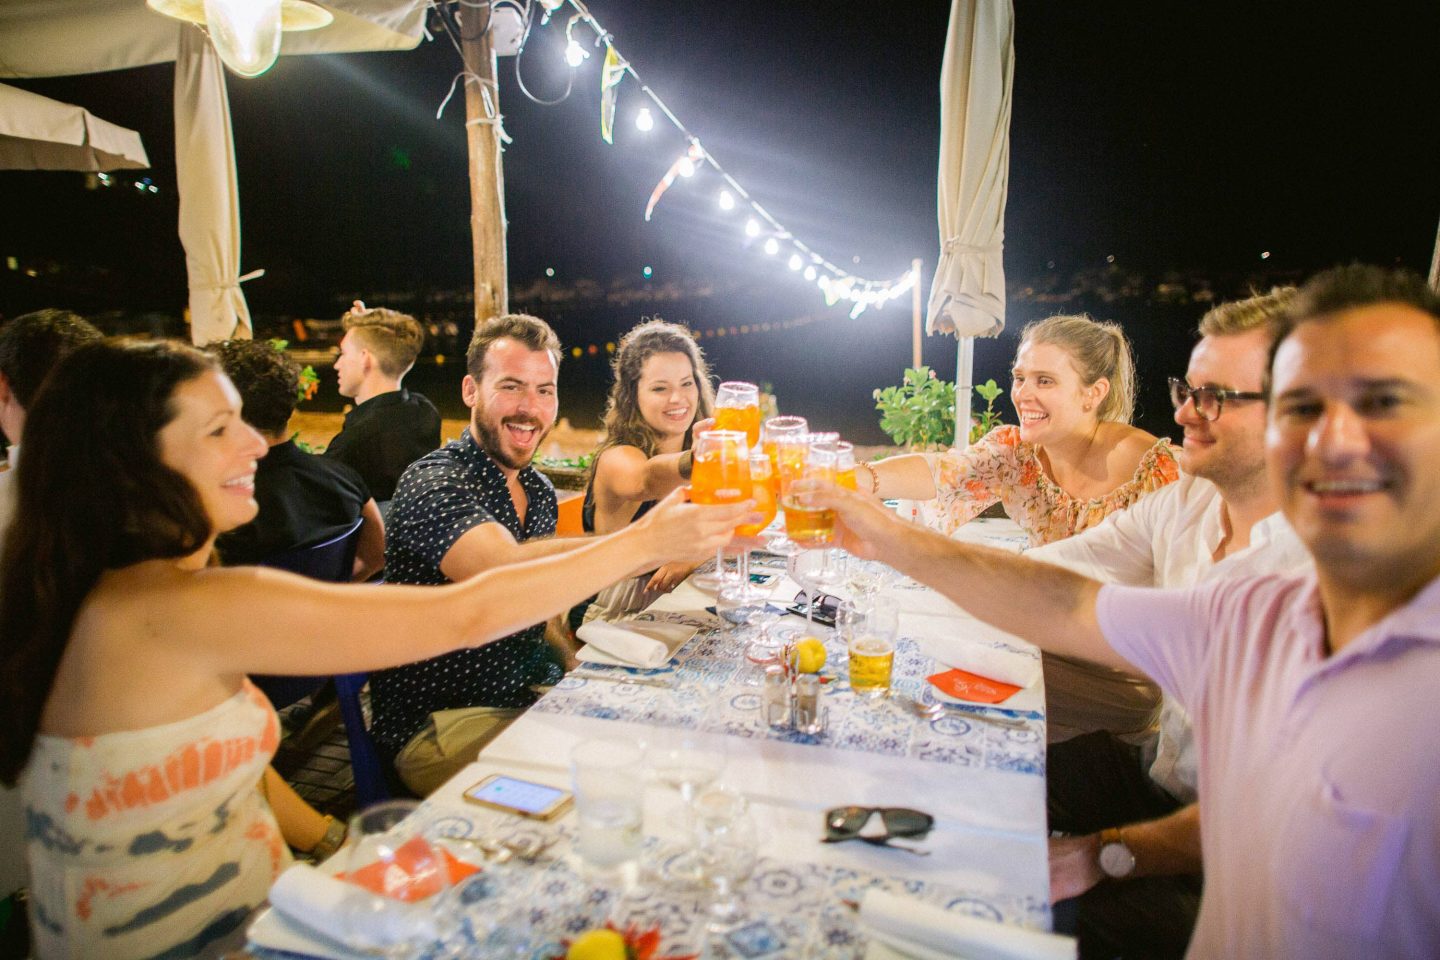 Cheers during the evening pizza party at this Amalfi Coast wedding weekend held Lo Scoglio | Photo by Allan Zepeda